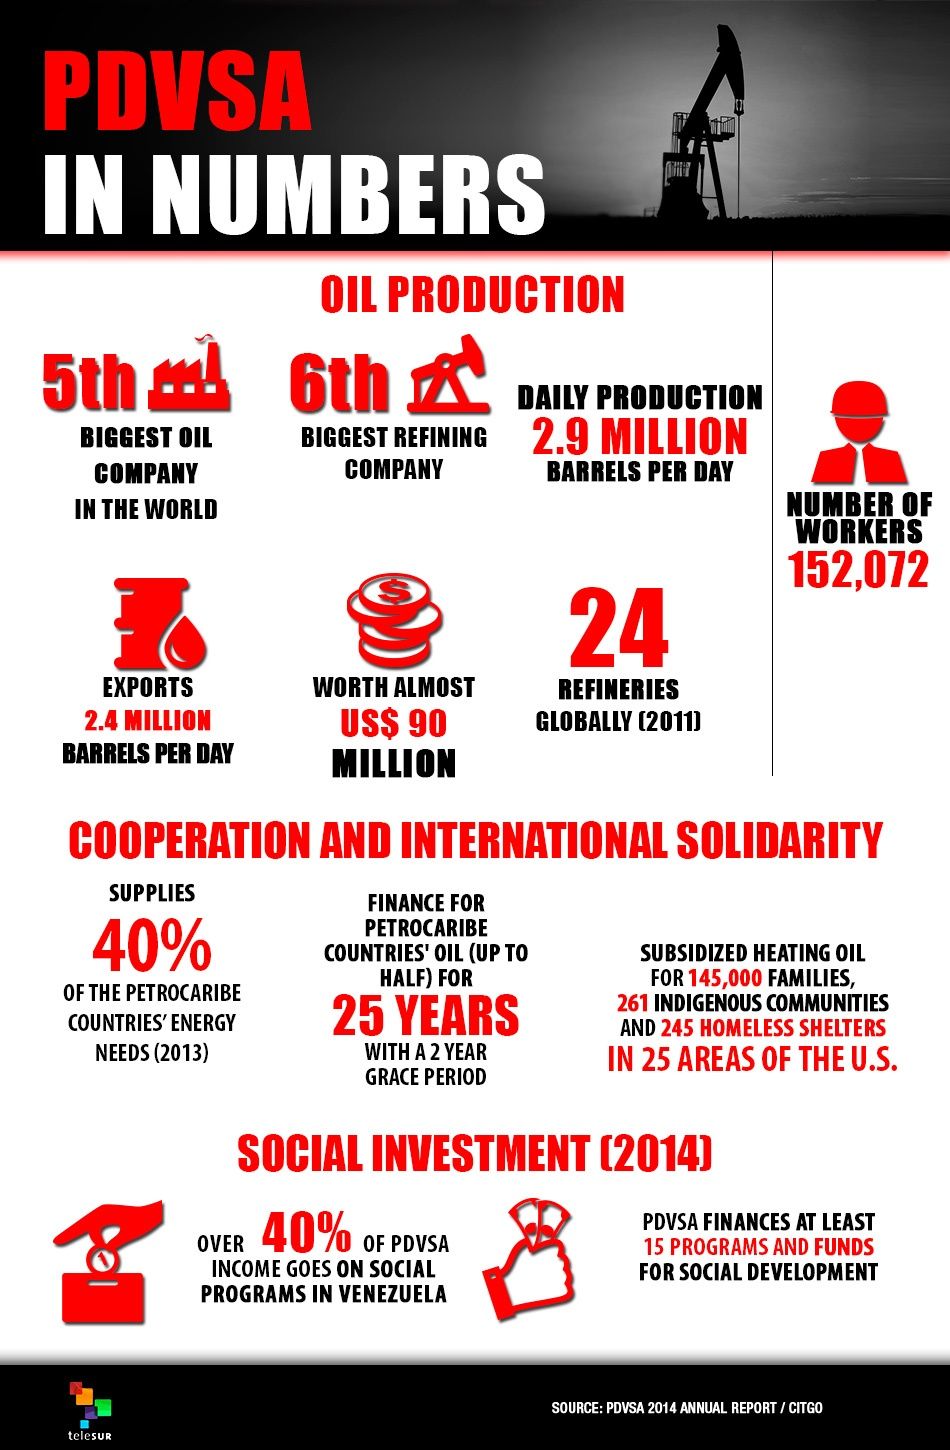 PDVSA in Numbers